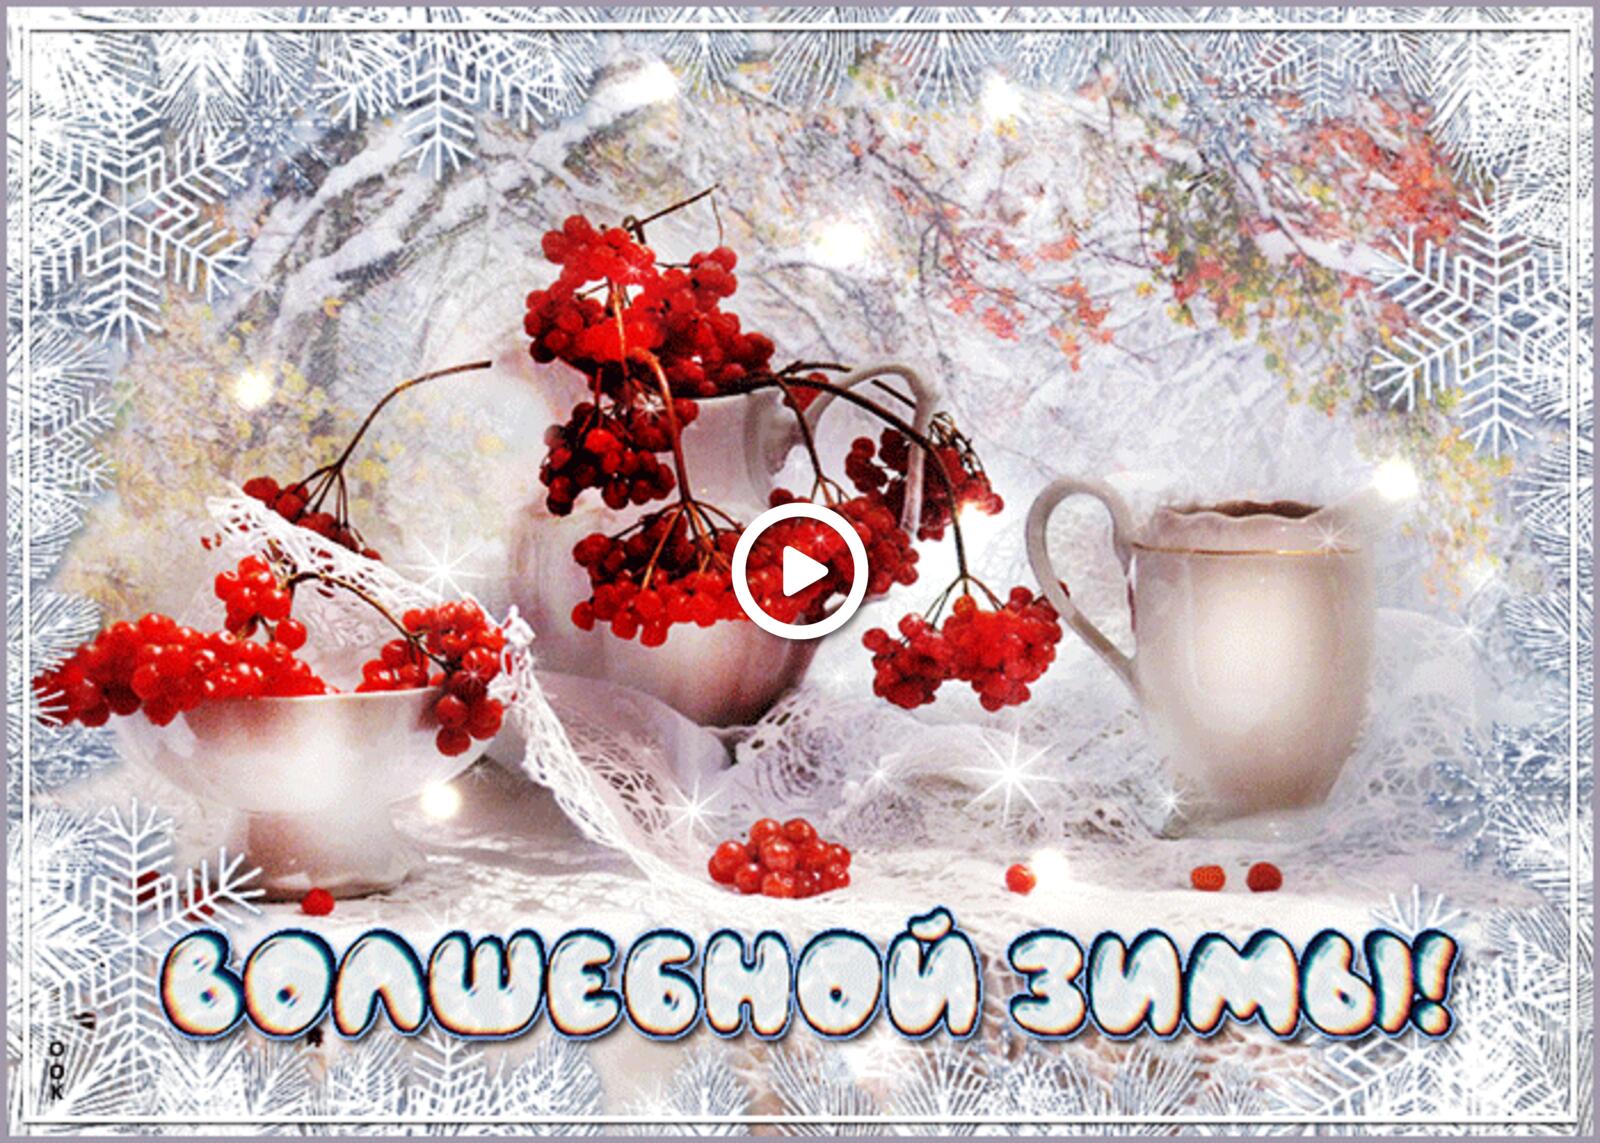 A postcard on the subject of creative magical winter berries snow for free